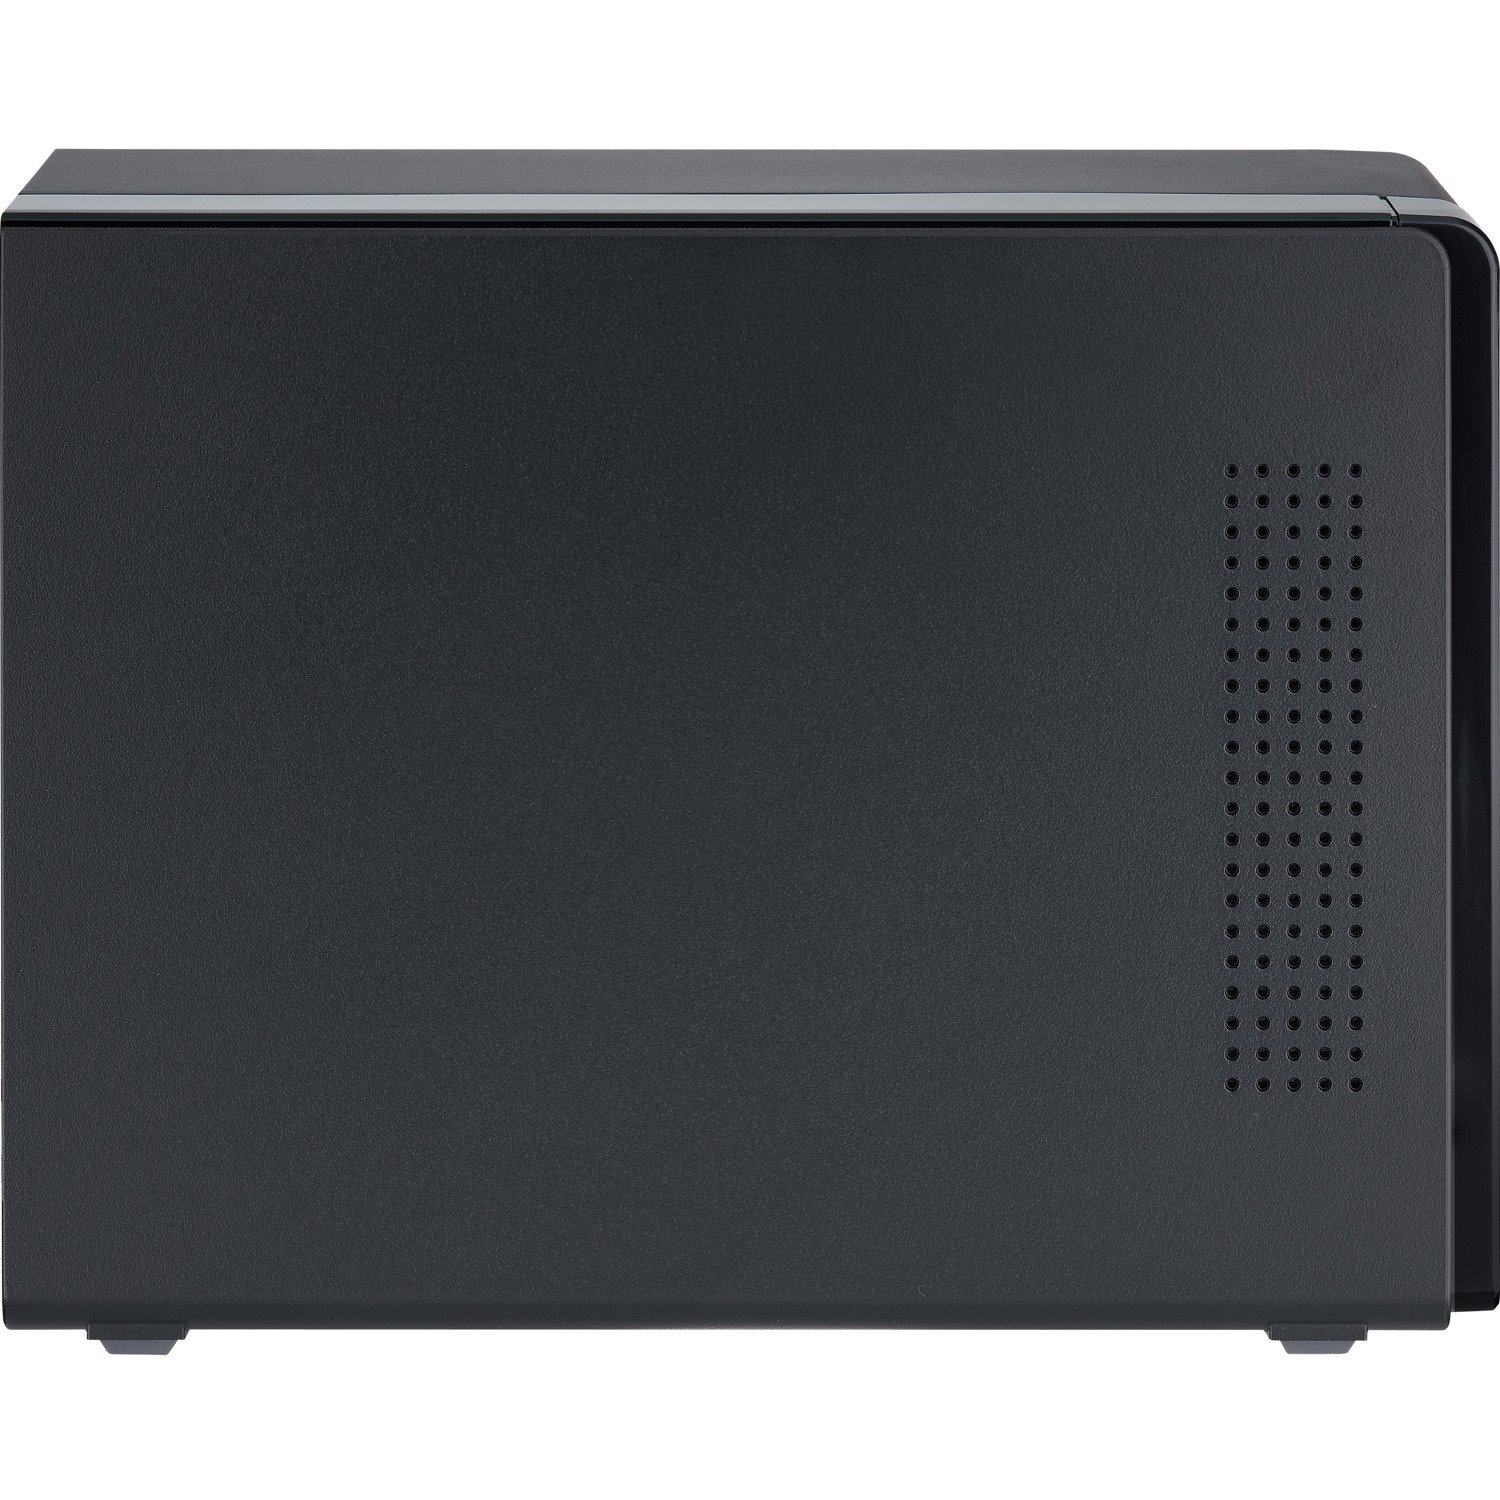 QNAP 2 Bay USB Type-C Direct Attached Storage with Hardware RAID